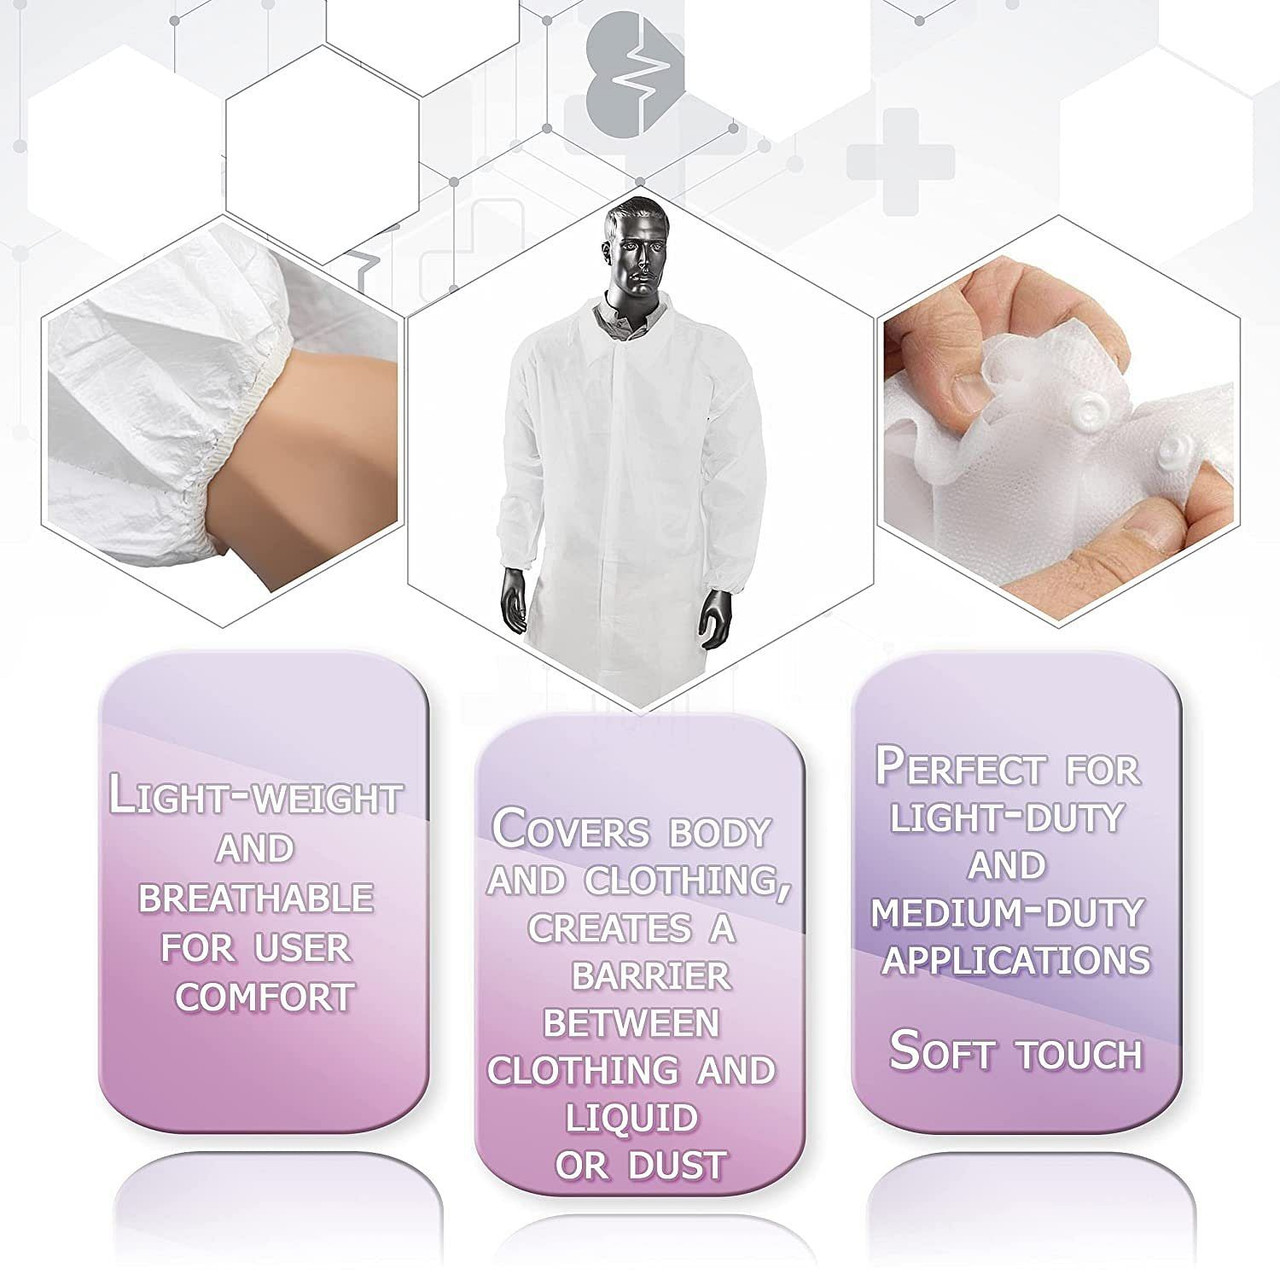 Disposable Lab Coat 43" x 55" Adult SMS Lab Coat 40 gsm X-Large White Lab Coat with Long Sleeves El